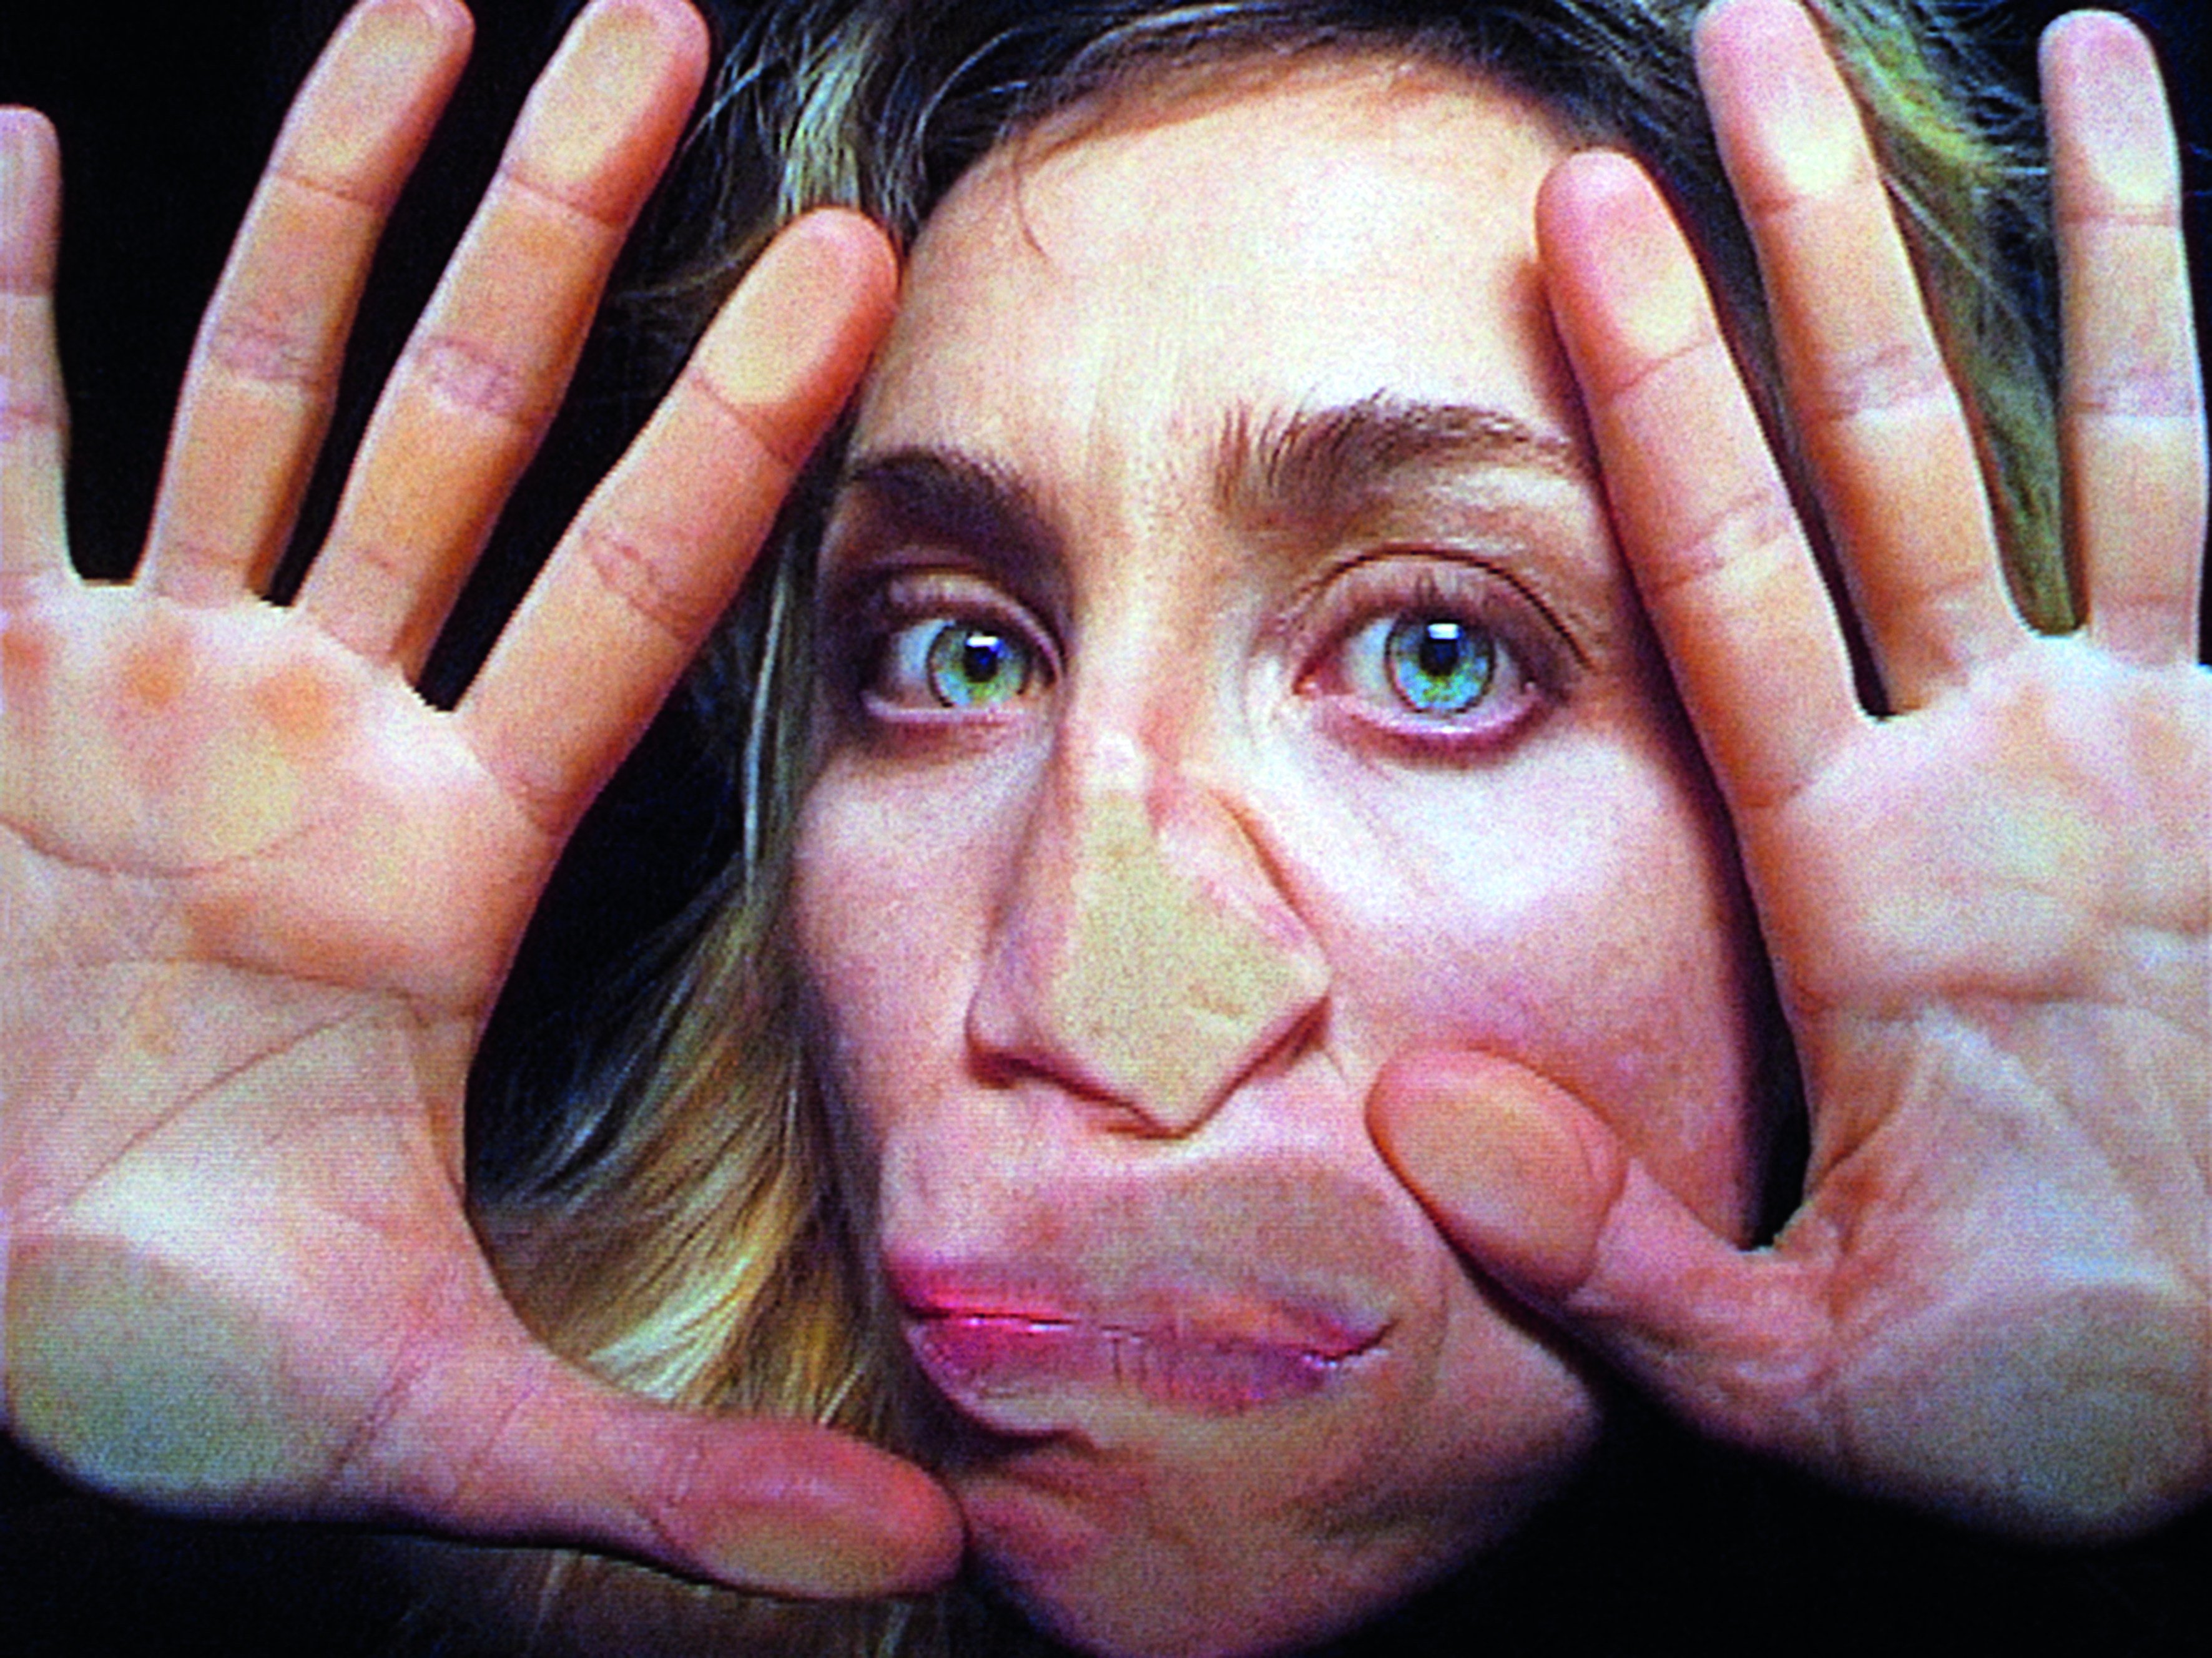 Artist Pipilotti Rist, at JC Contemporary in Tai Kwun. Her ‘Behind Your Eyelid’ exhibition opens at Tai Kwun on August 3. Photo: Pipilotti Rist